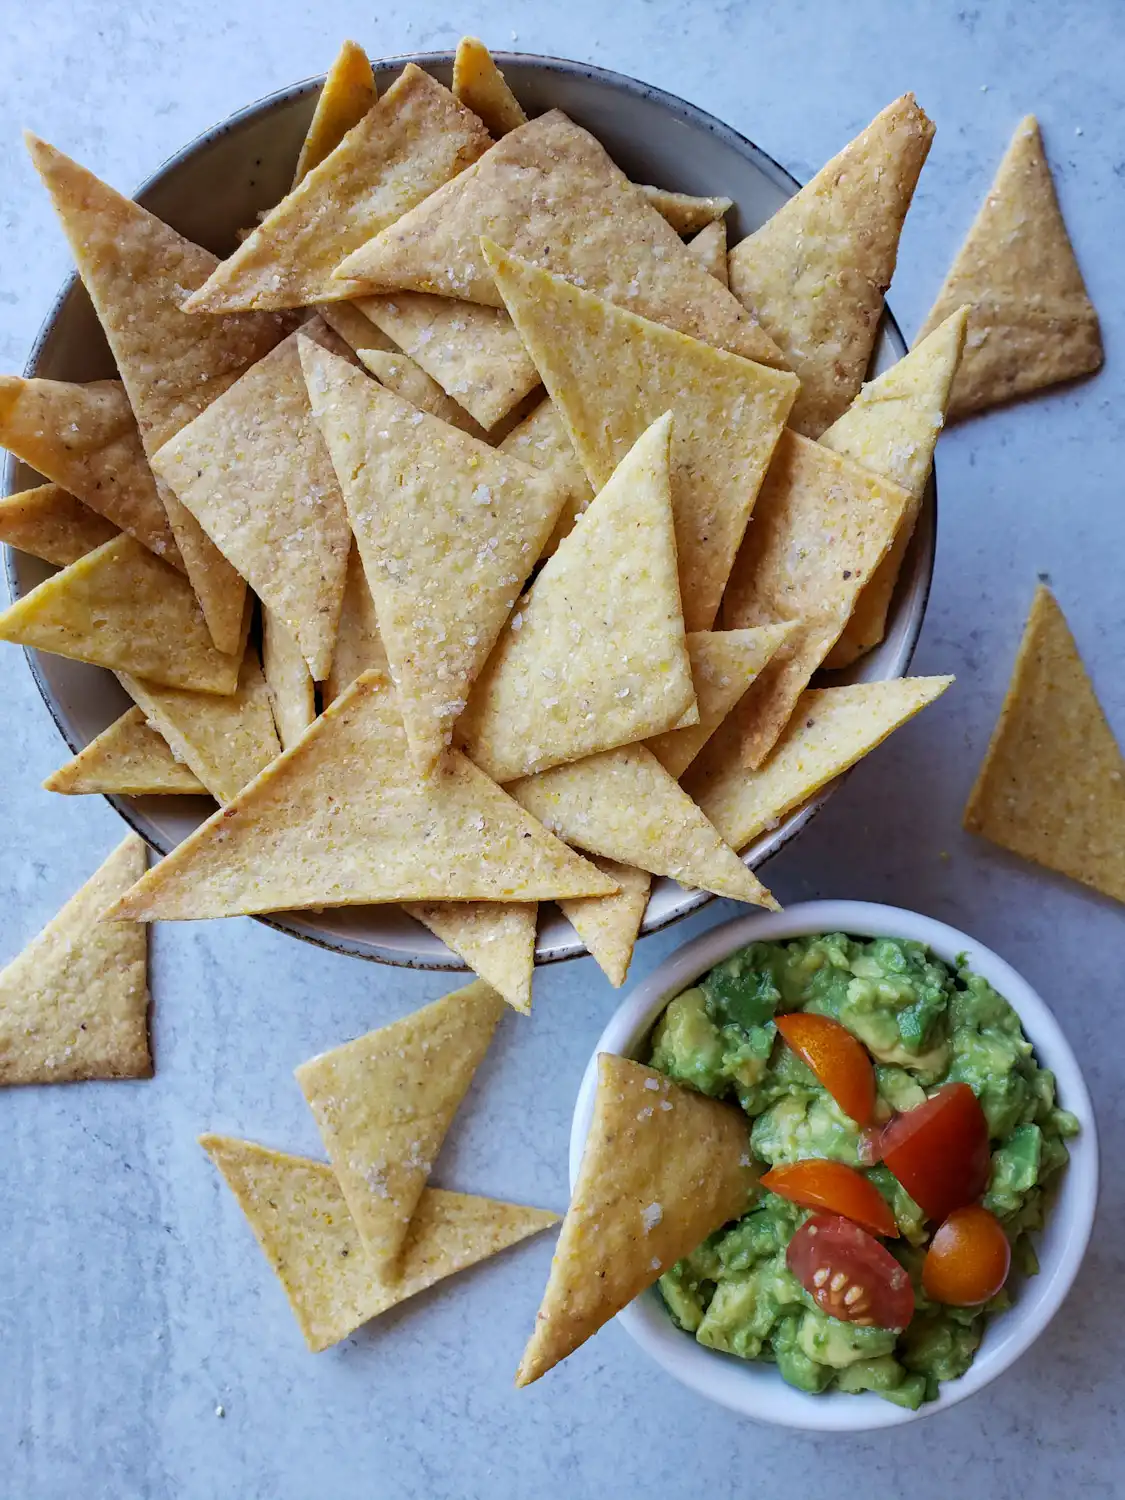 A close up image of a bowl of sourdough corn chips. They are golden to golden brown in color and triangular in shape. Specks of sea salt are visibly baked into the top of the chips. The bowl is overflowing with a few chips scattered around the perimeter of the bowl and a smaller white ramekin of fresh guacamole garnished with halved cherry tomatoes sits nearby. 